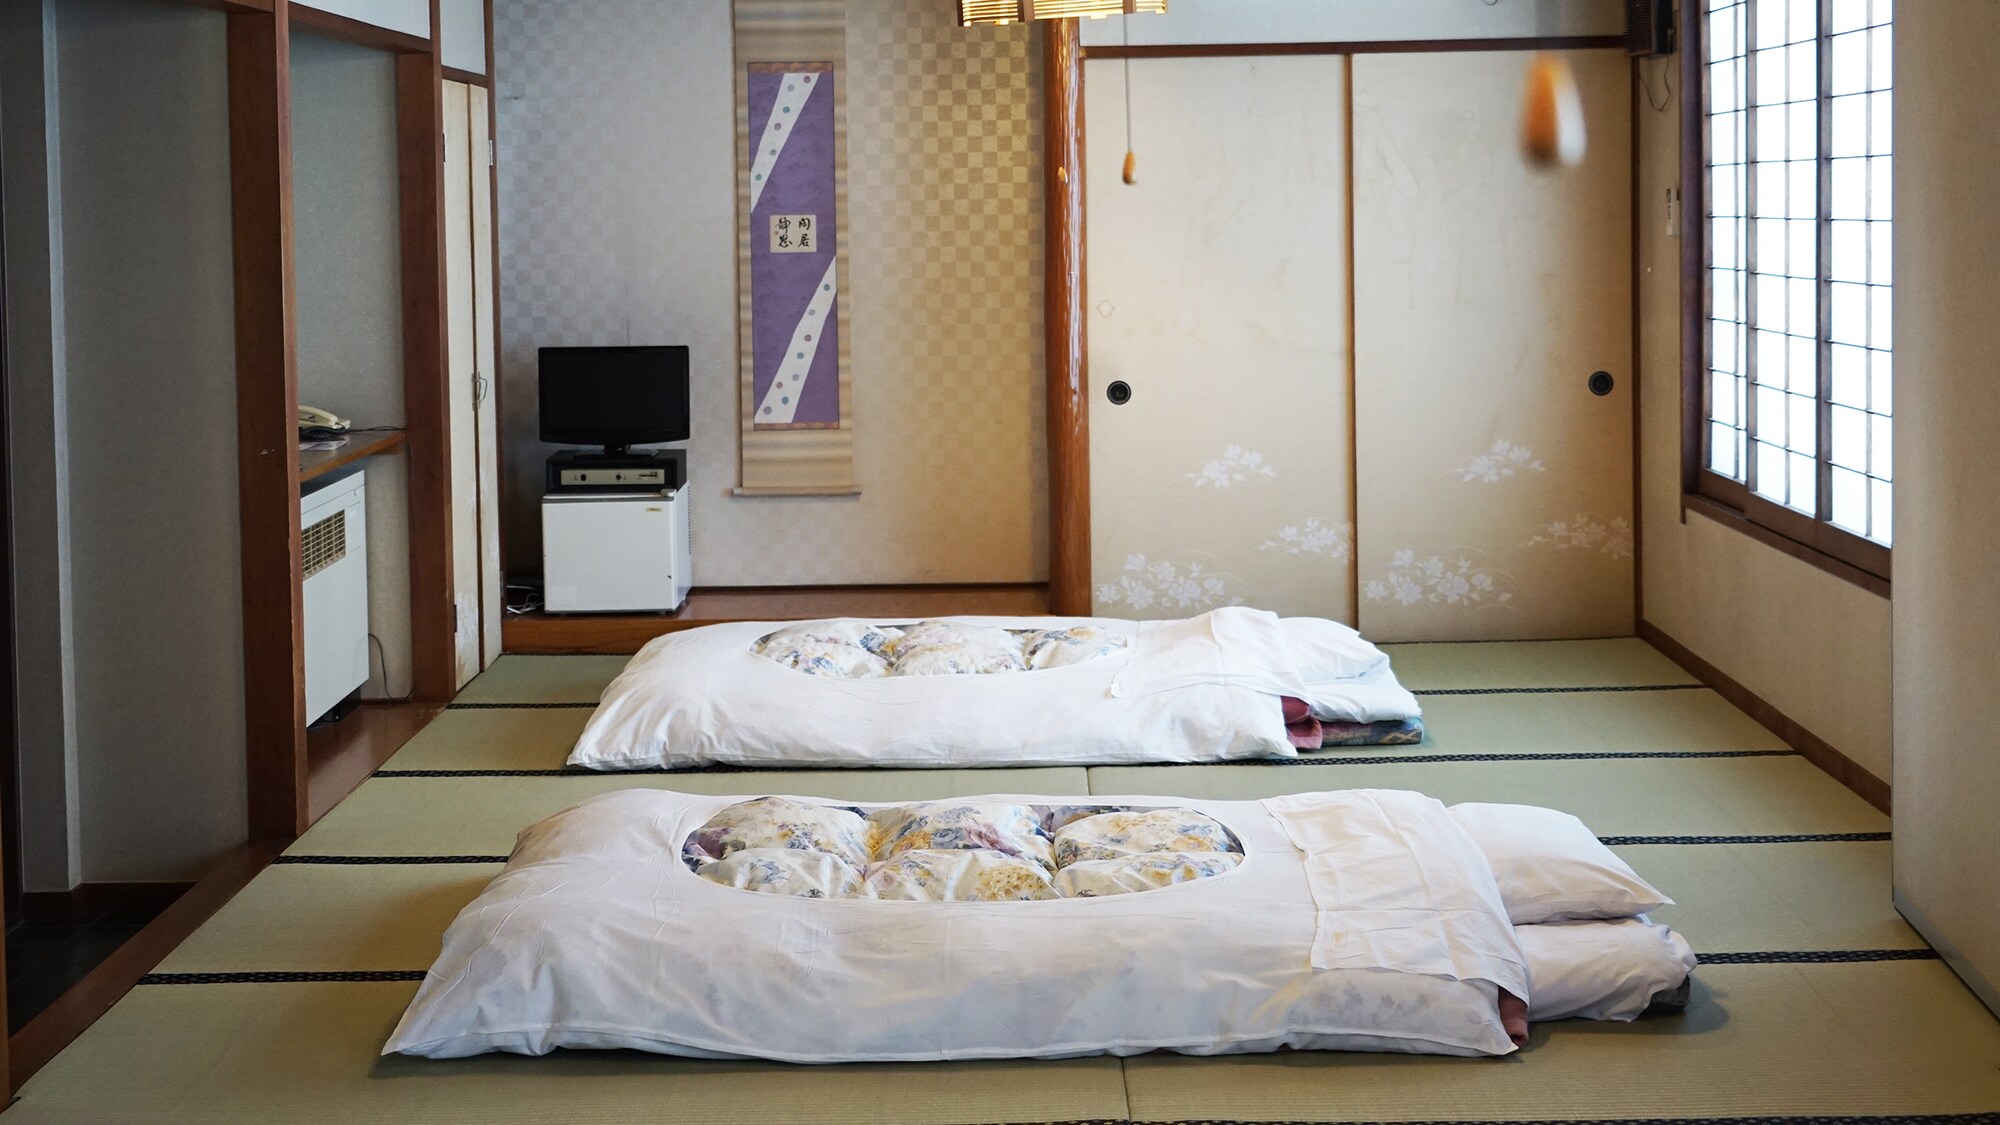 [Example of Japanese-style room]